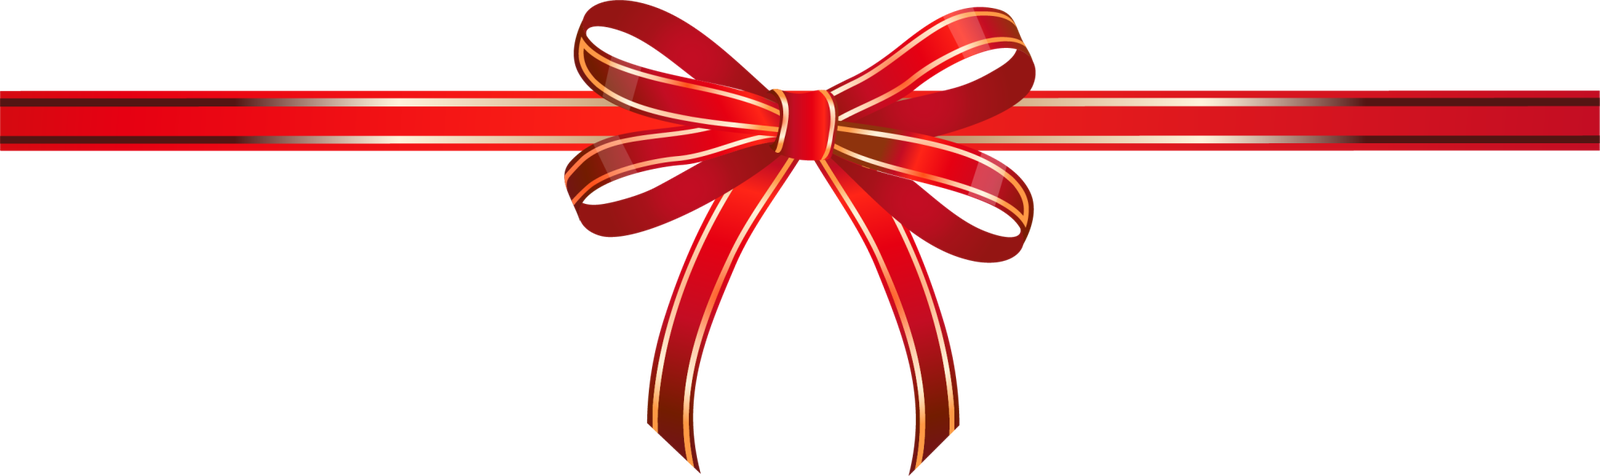 kisspng-ribbon-shoelace-knot-gift-red-bow-bow-5aa21362506386.5908421515205712343293.png